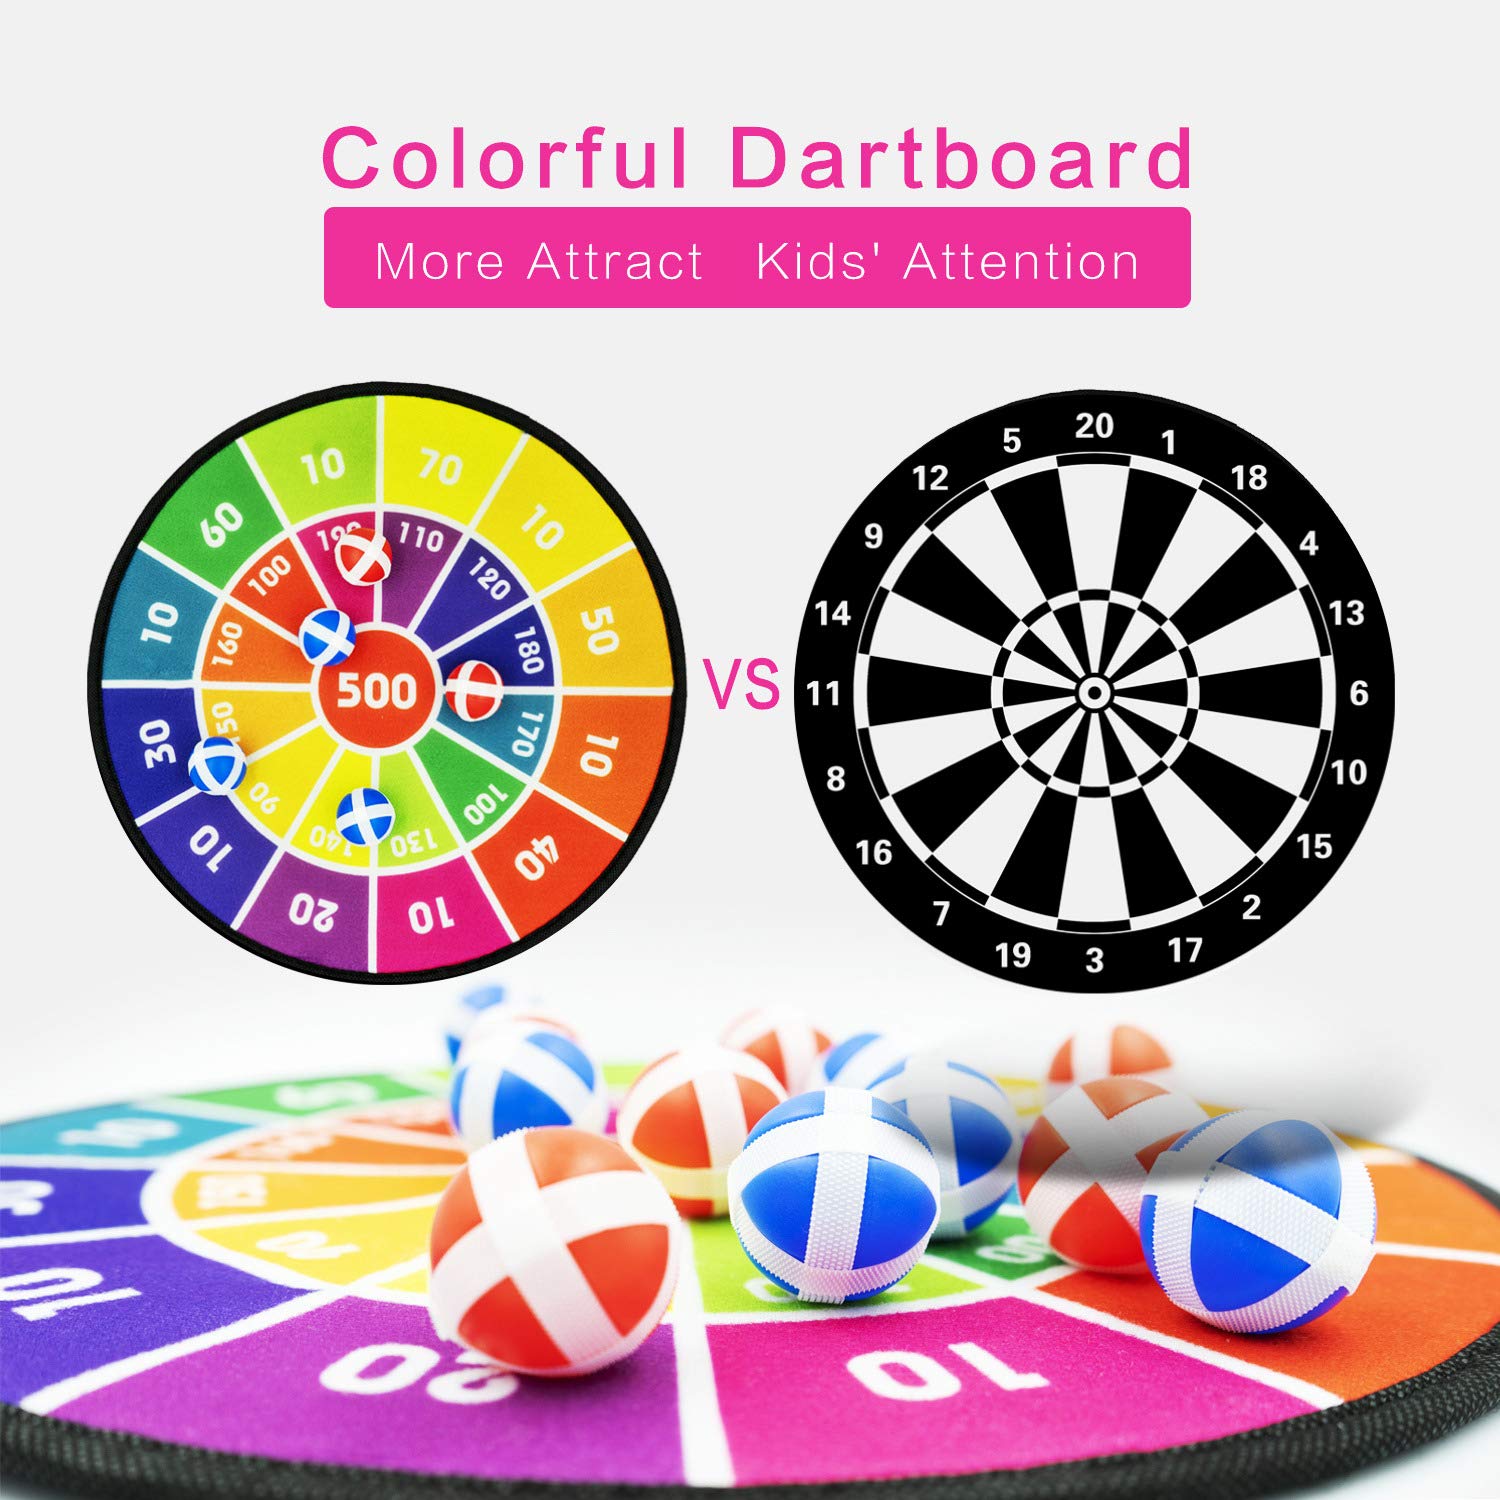 Toys Darts Games - Dart Board for Kids with 12 Balls - Boys Gifts Girls Toys for Indoor Outdoor Play, Birthday Party Throwing Target Games for Children Age 3 4 5 6 7 8 9 10 11 12 13 Year Old and Up